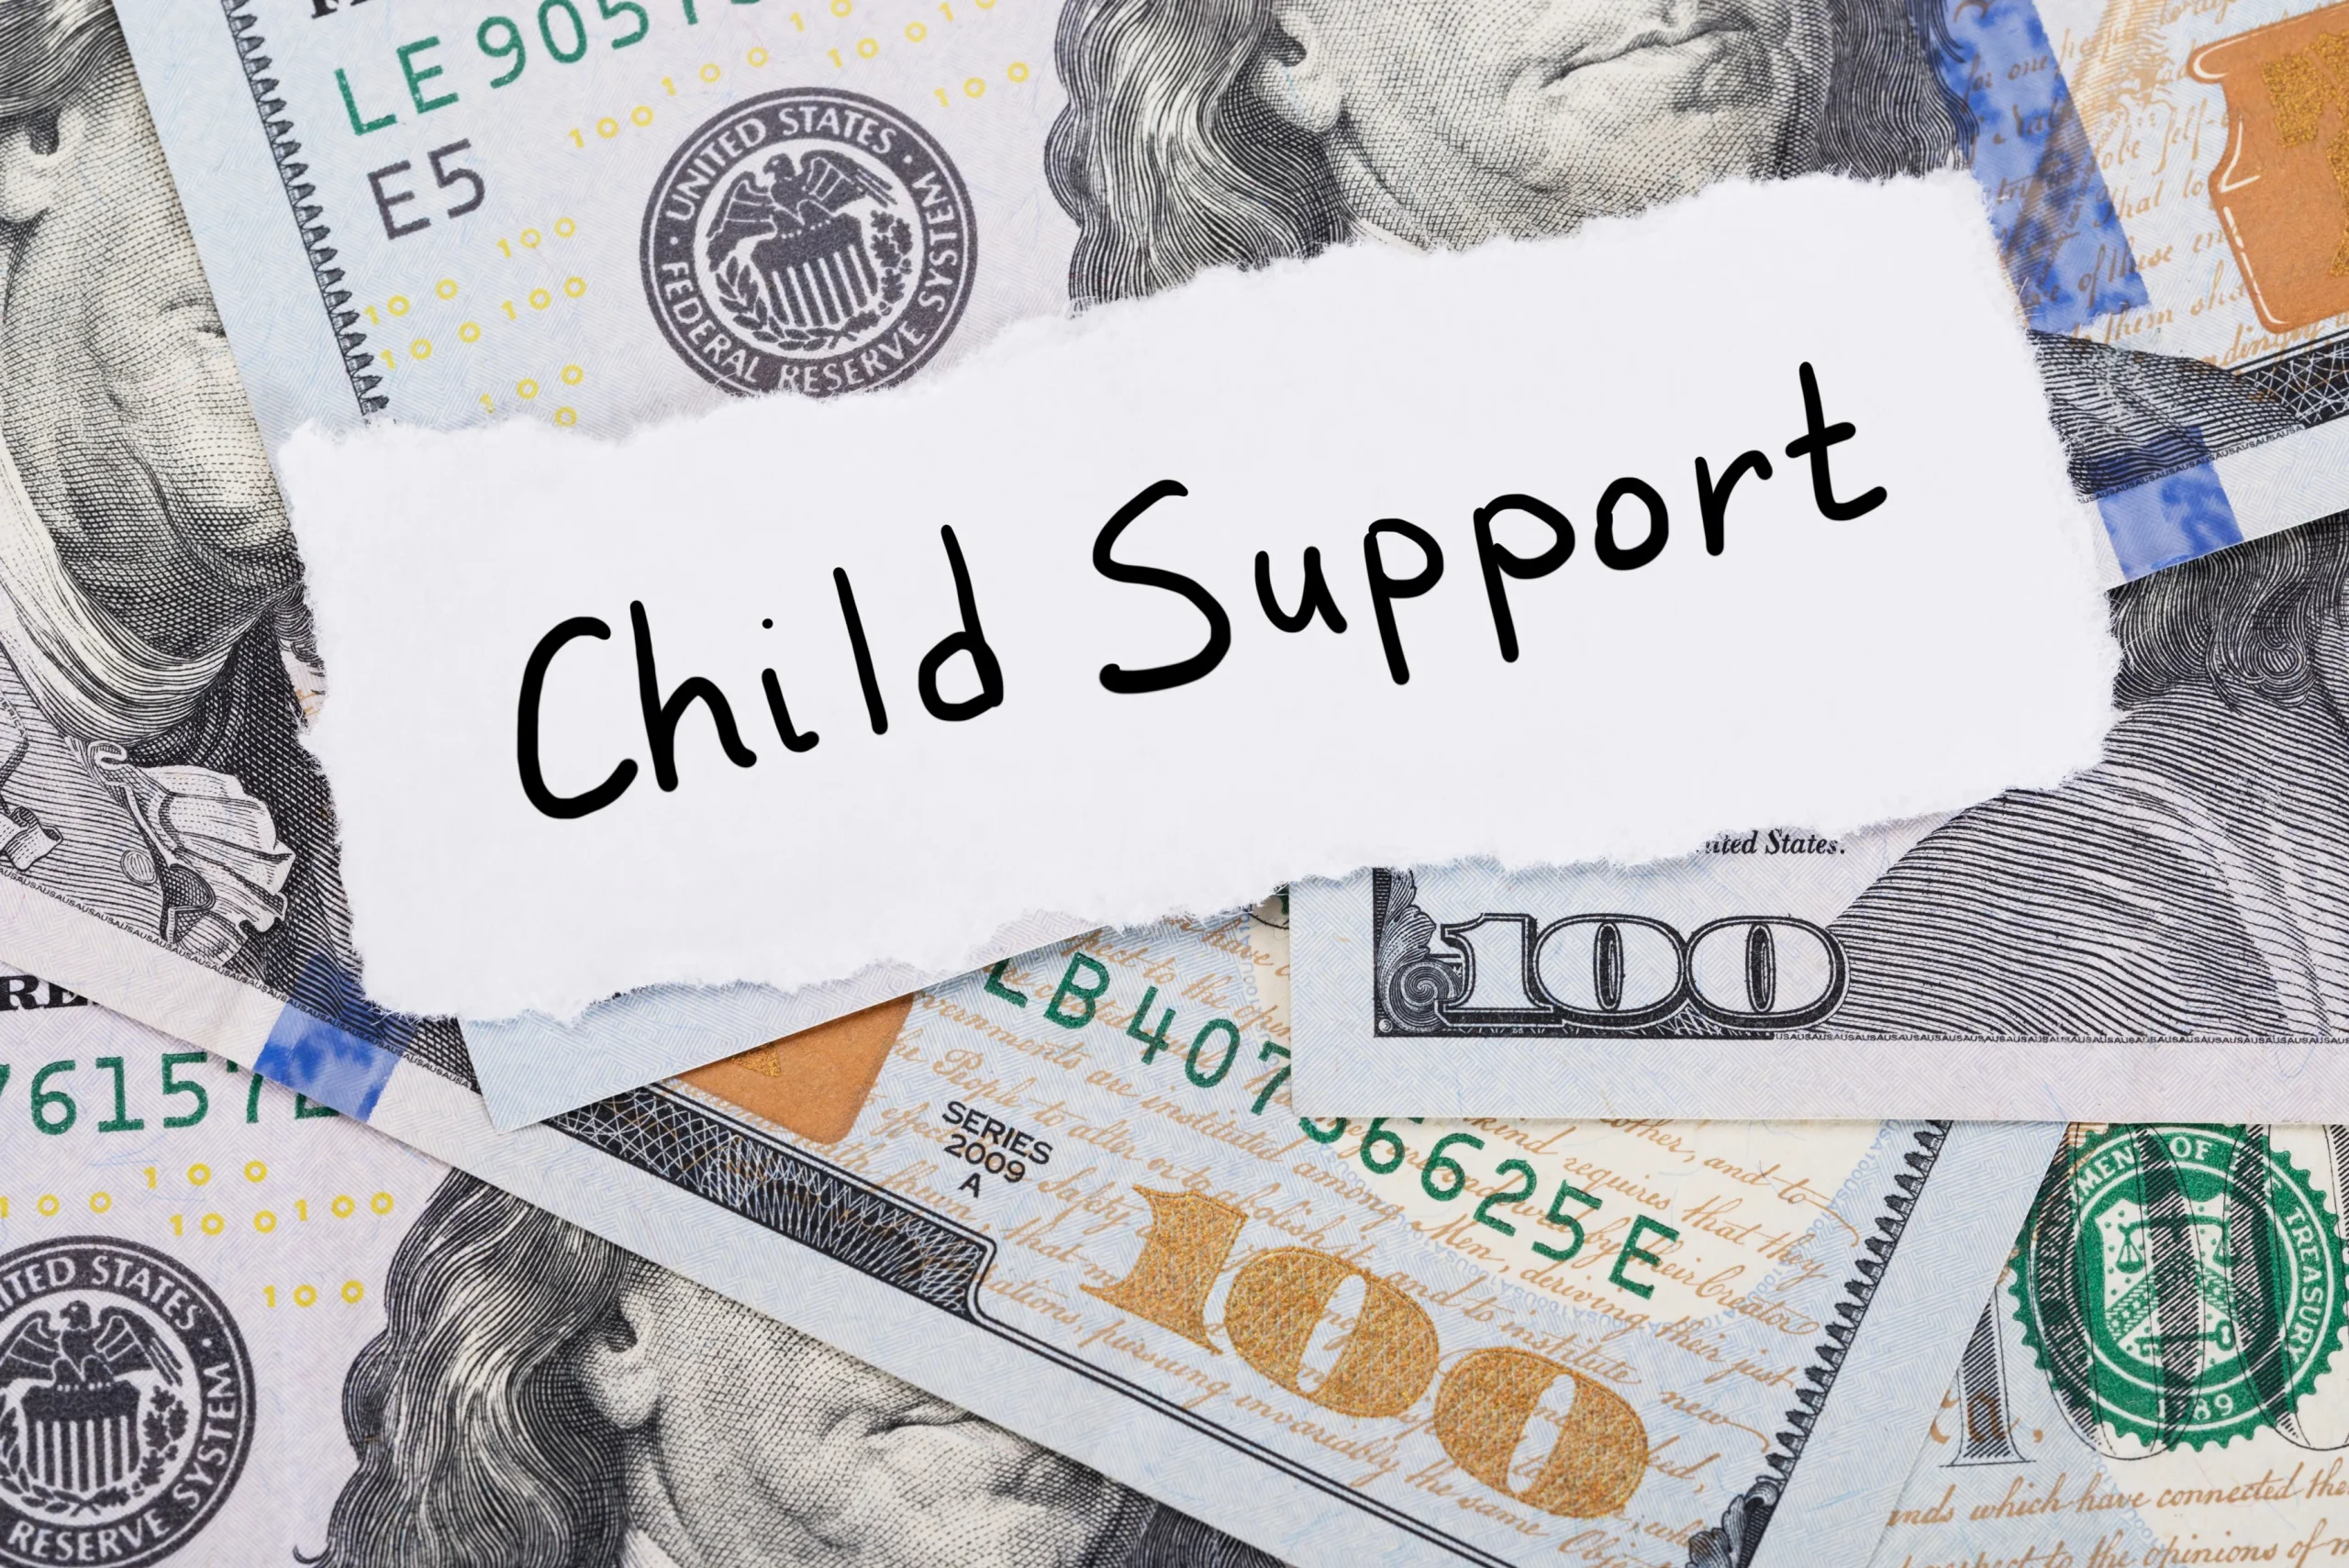 Child support written on a piece of paper on top of money.